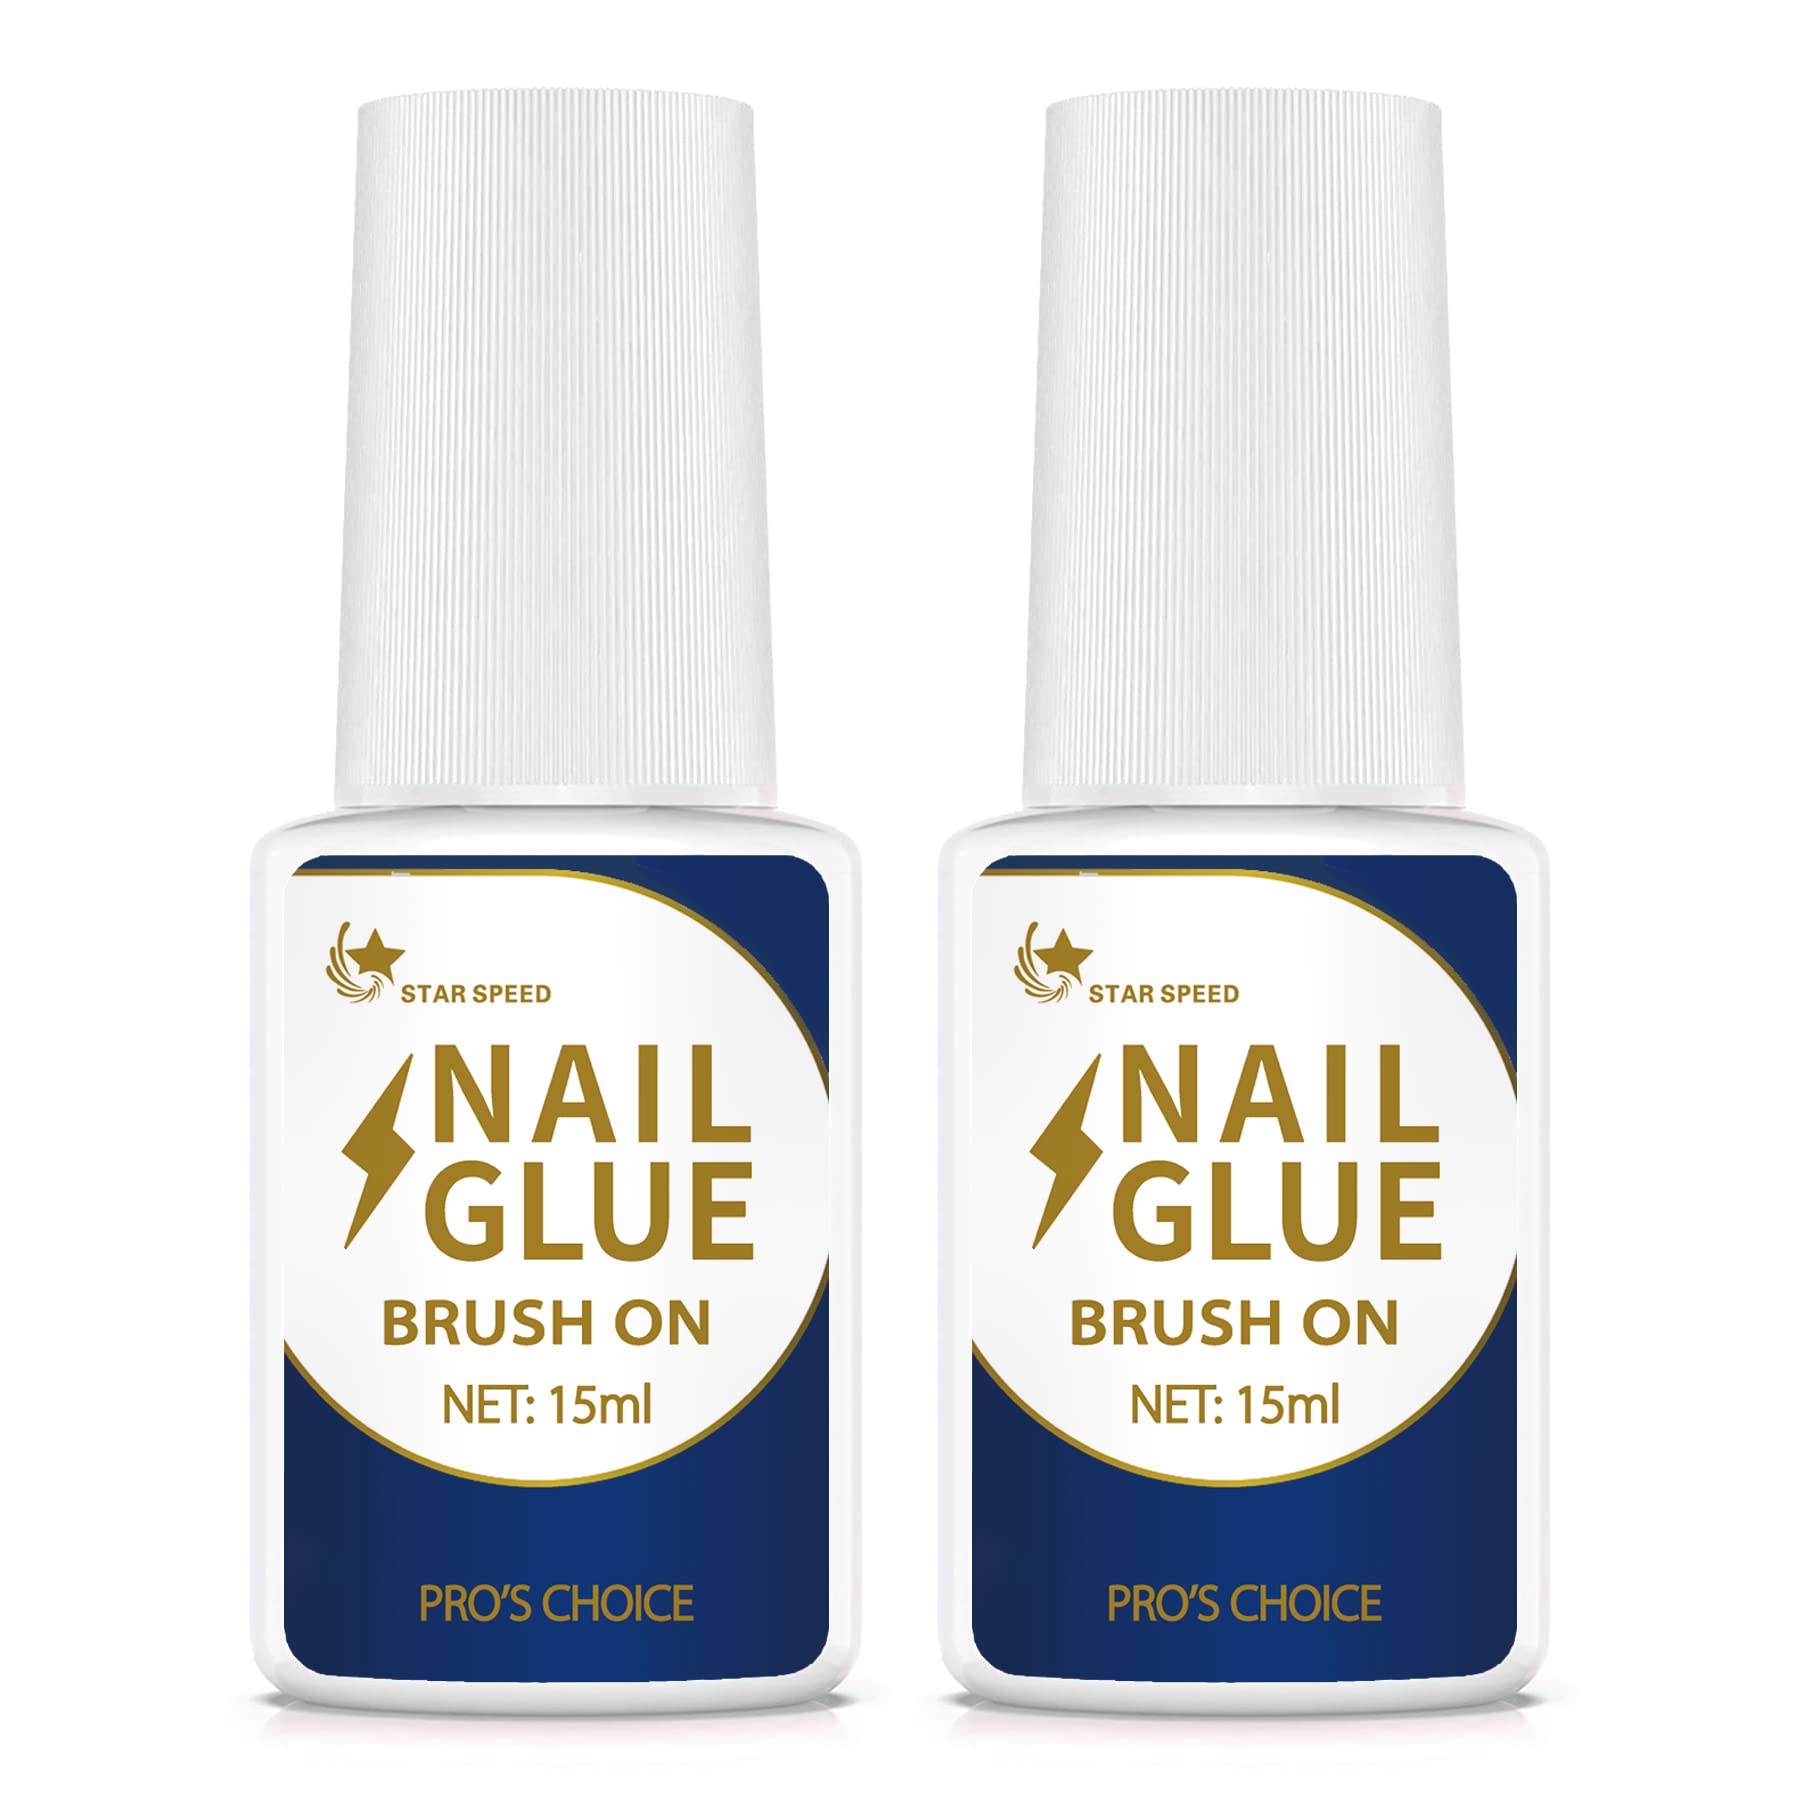 Brunson Extra Strong Nail Glue for Artificial Nail Tips & Acrylic Nails  Professional Salon Quality With Brush 20g BSNG20 | KHDA Approved Beauty  Academy ≡ Nail ⋅ Eye ⋅ Skin ⋅ Hair